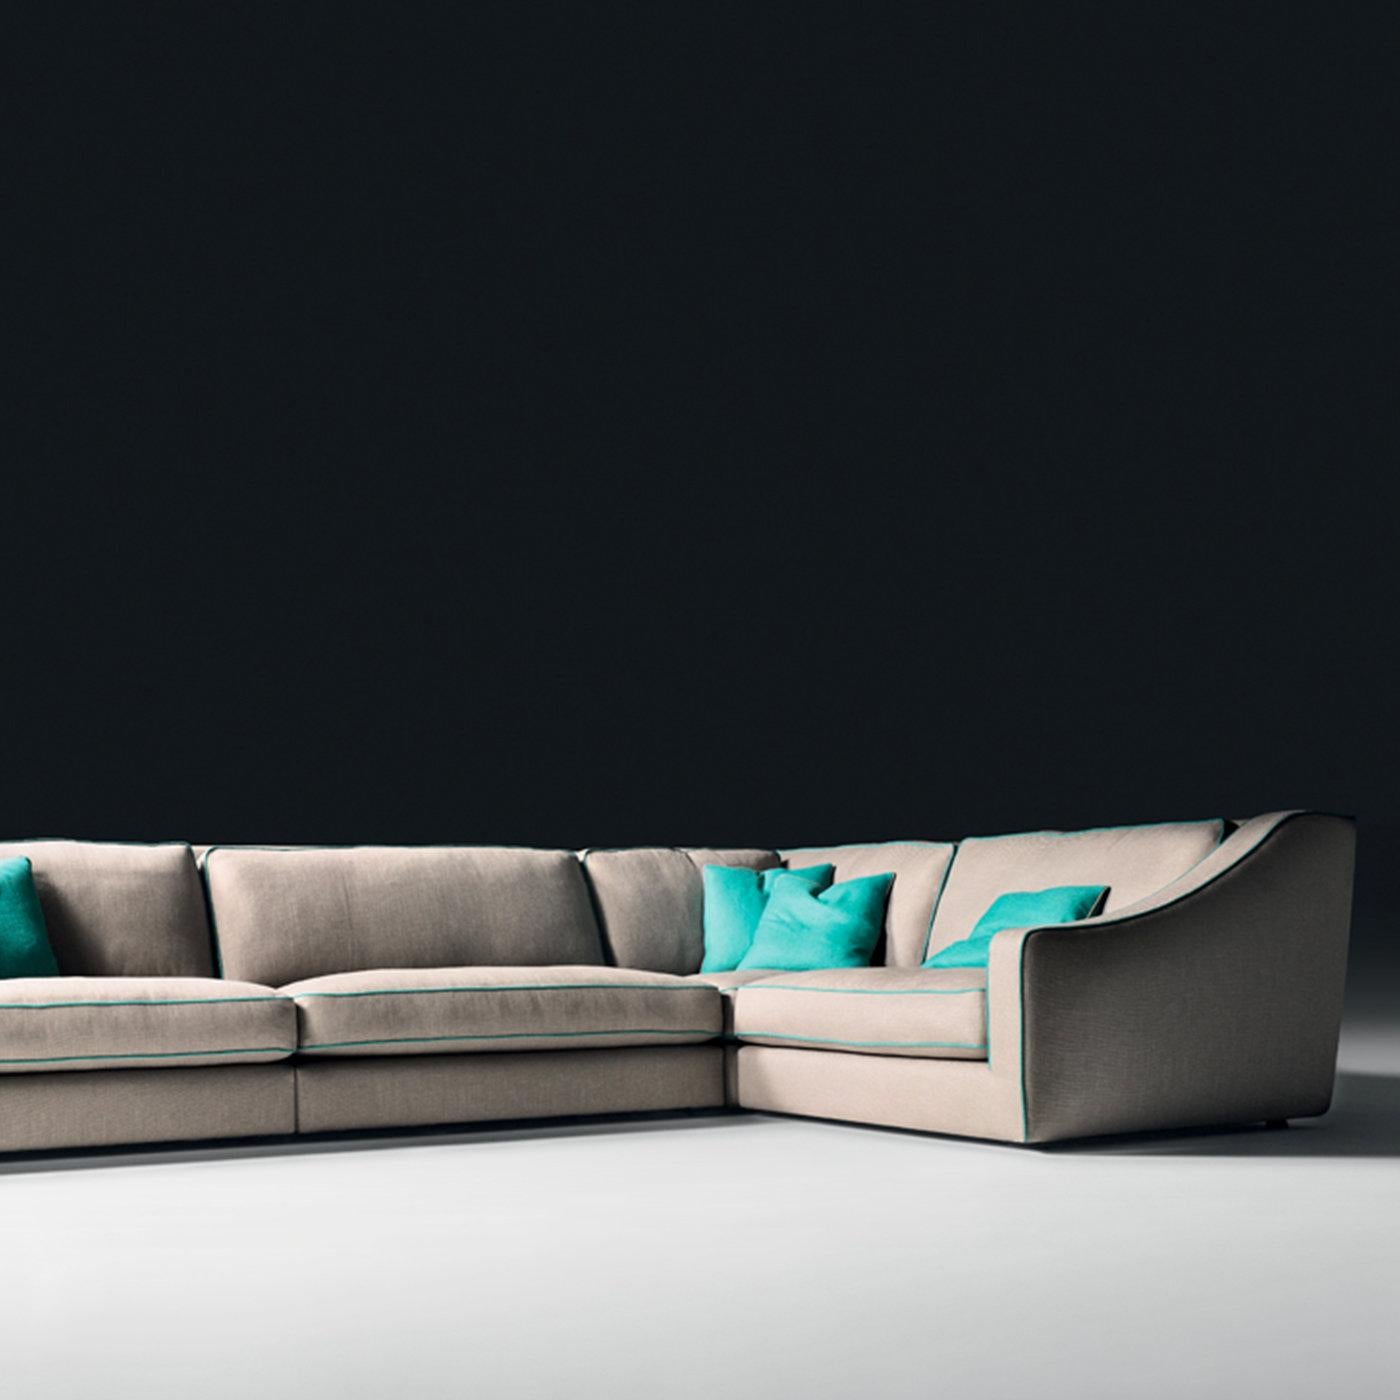 Boasting a clean and minimal design defined by exquisite lines outlining the soft edges of this simple and charming silhouette, this sofa comprises a poplar and fir structure covered with thermo-bonded fiber mixed with flexible jersey fabric that is